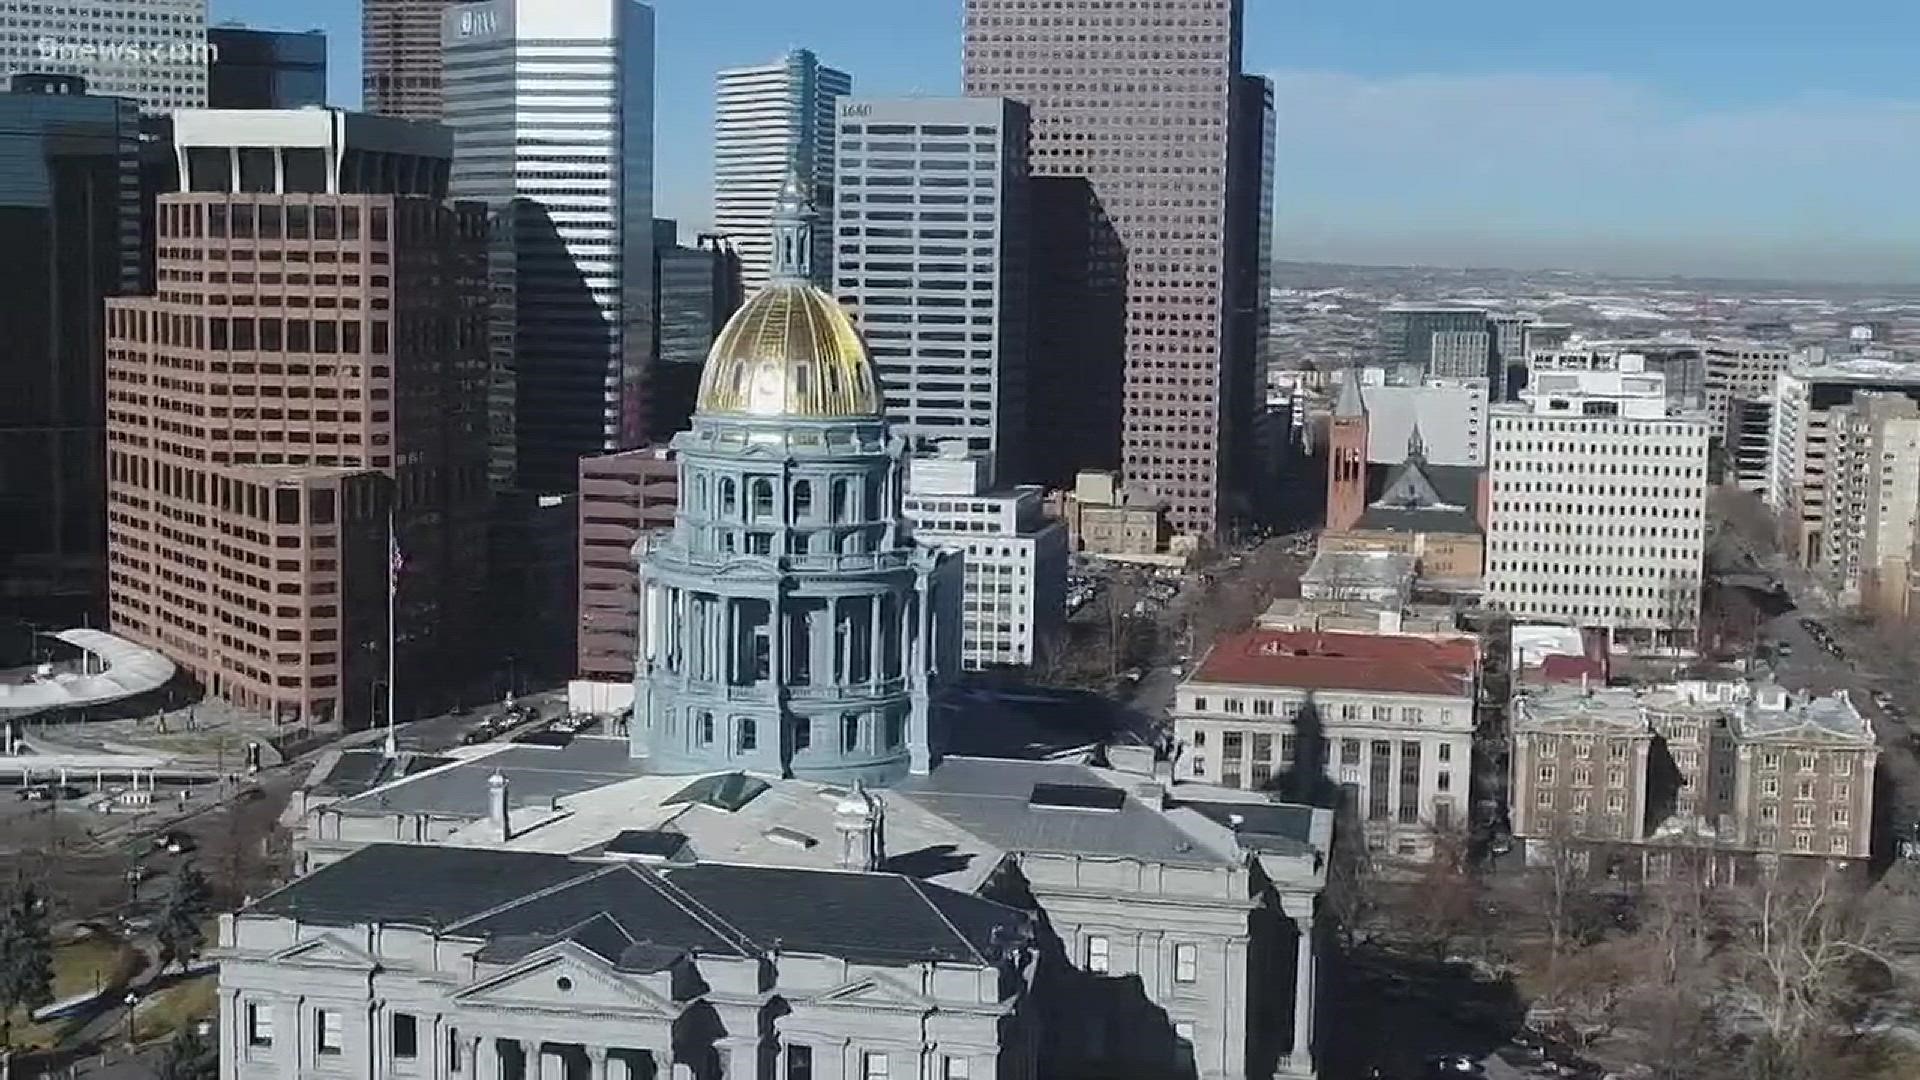 The resolution, meant to mark April 2, 2019, as "Equal Pay Day", will see Colorado acknowledge "the persistent problem of wage disparity."